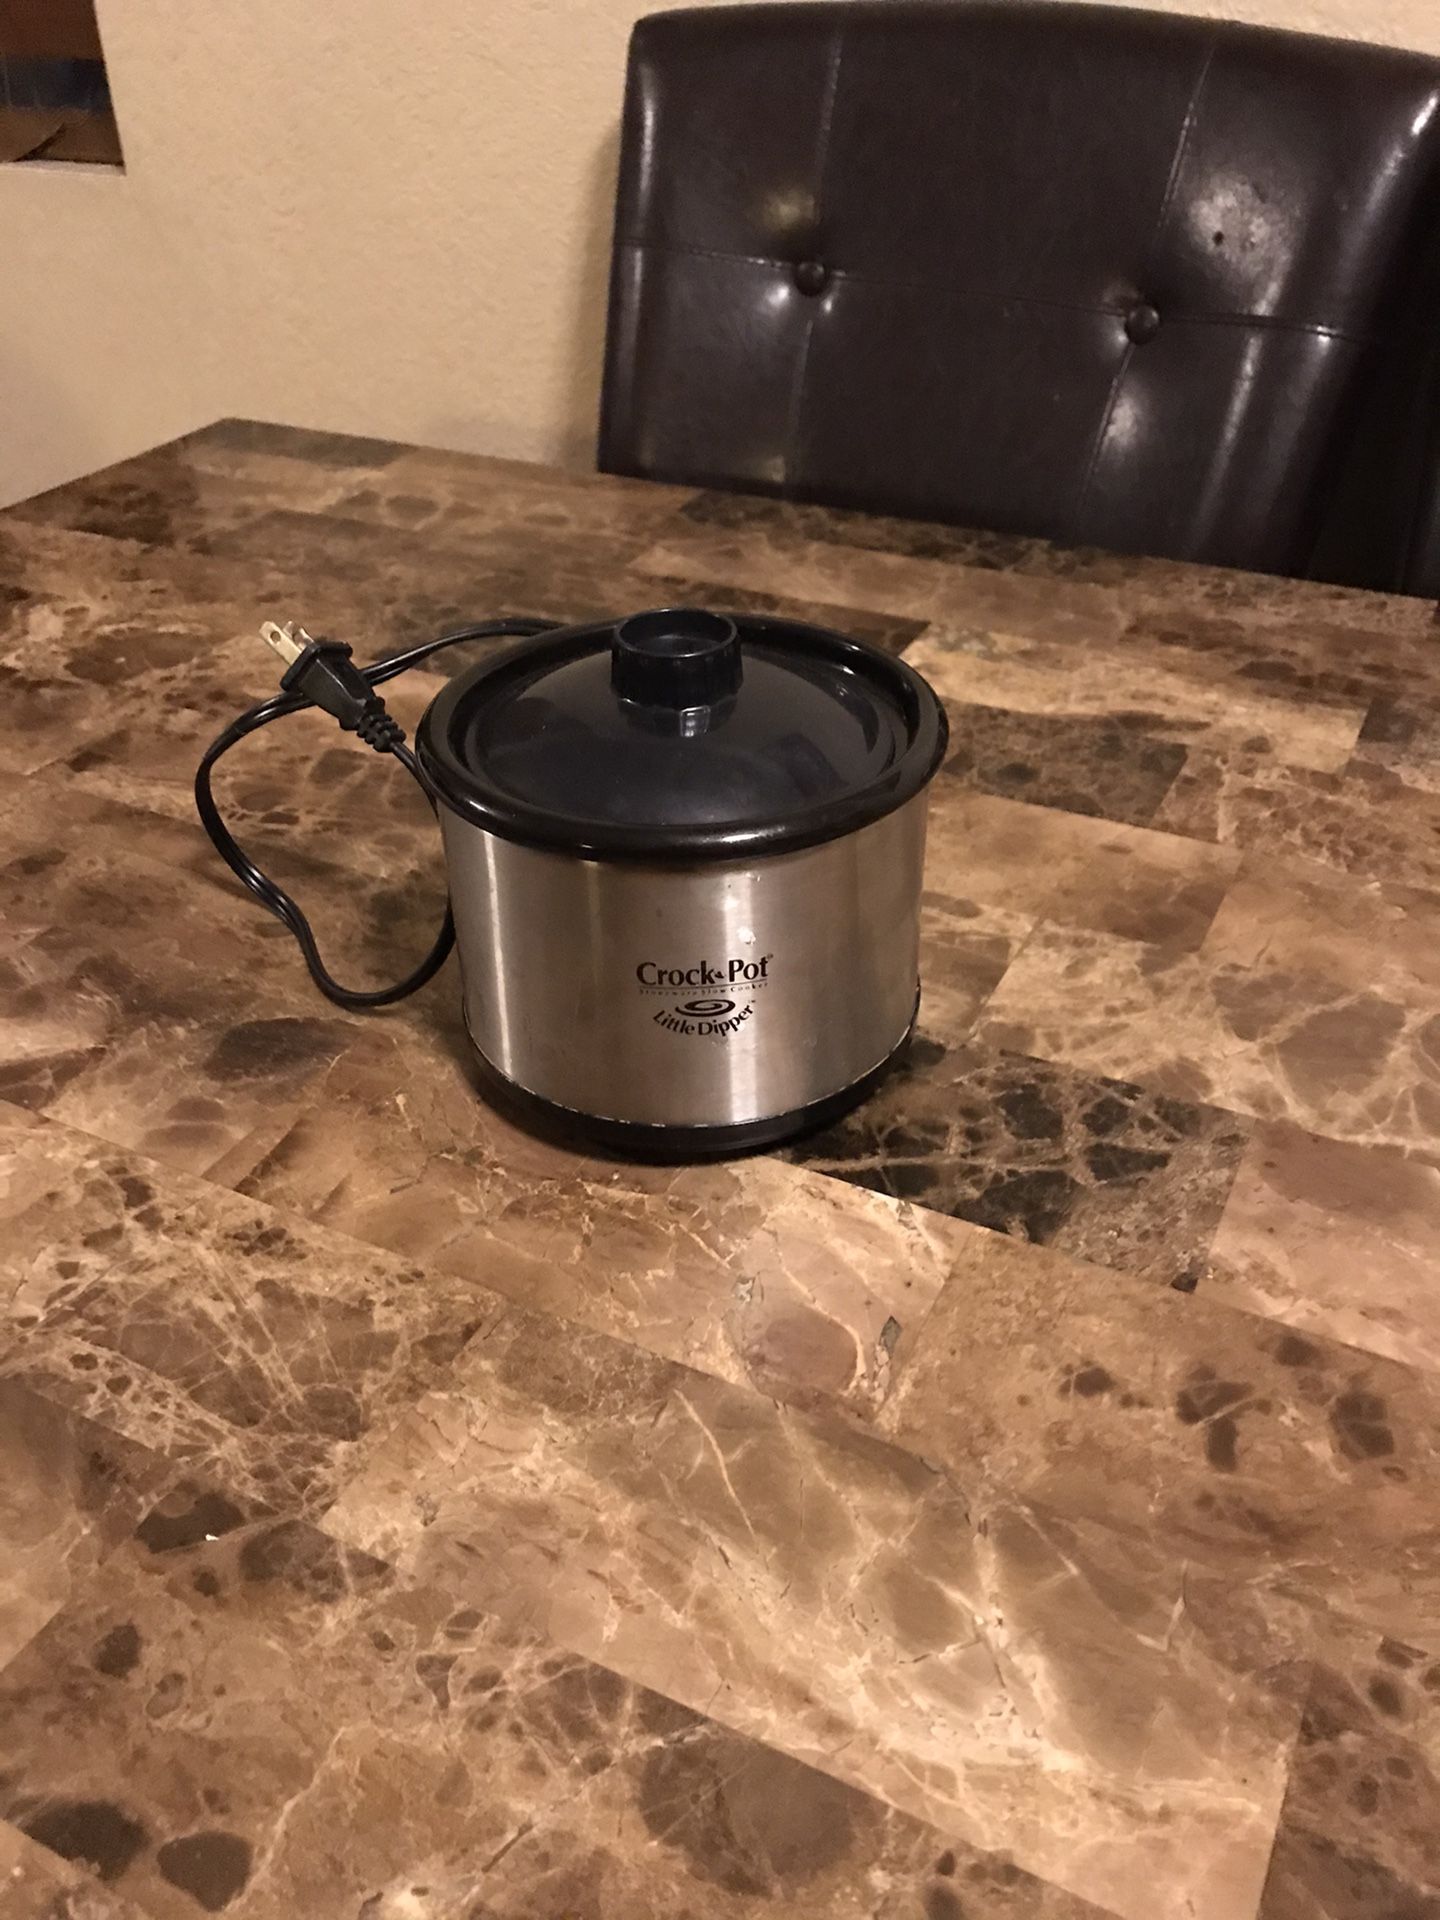 Crock pot Little Dipper work great cook for 1 person $6